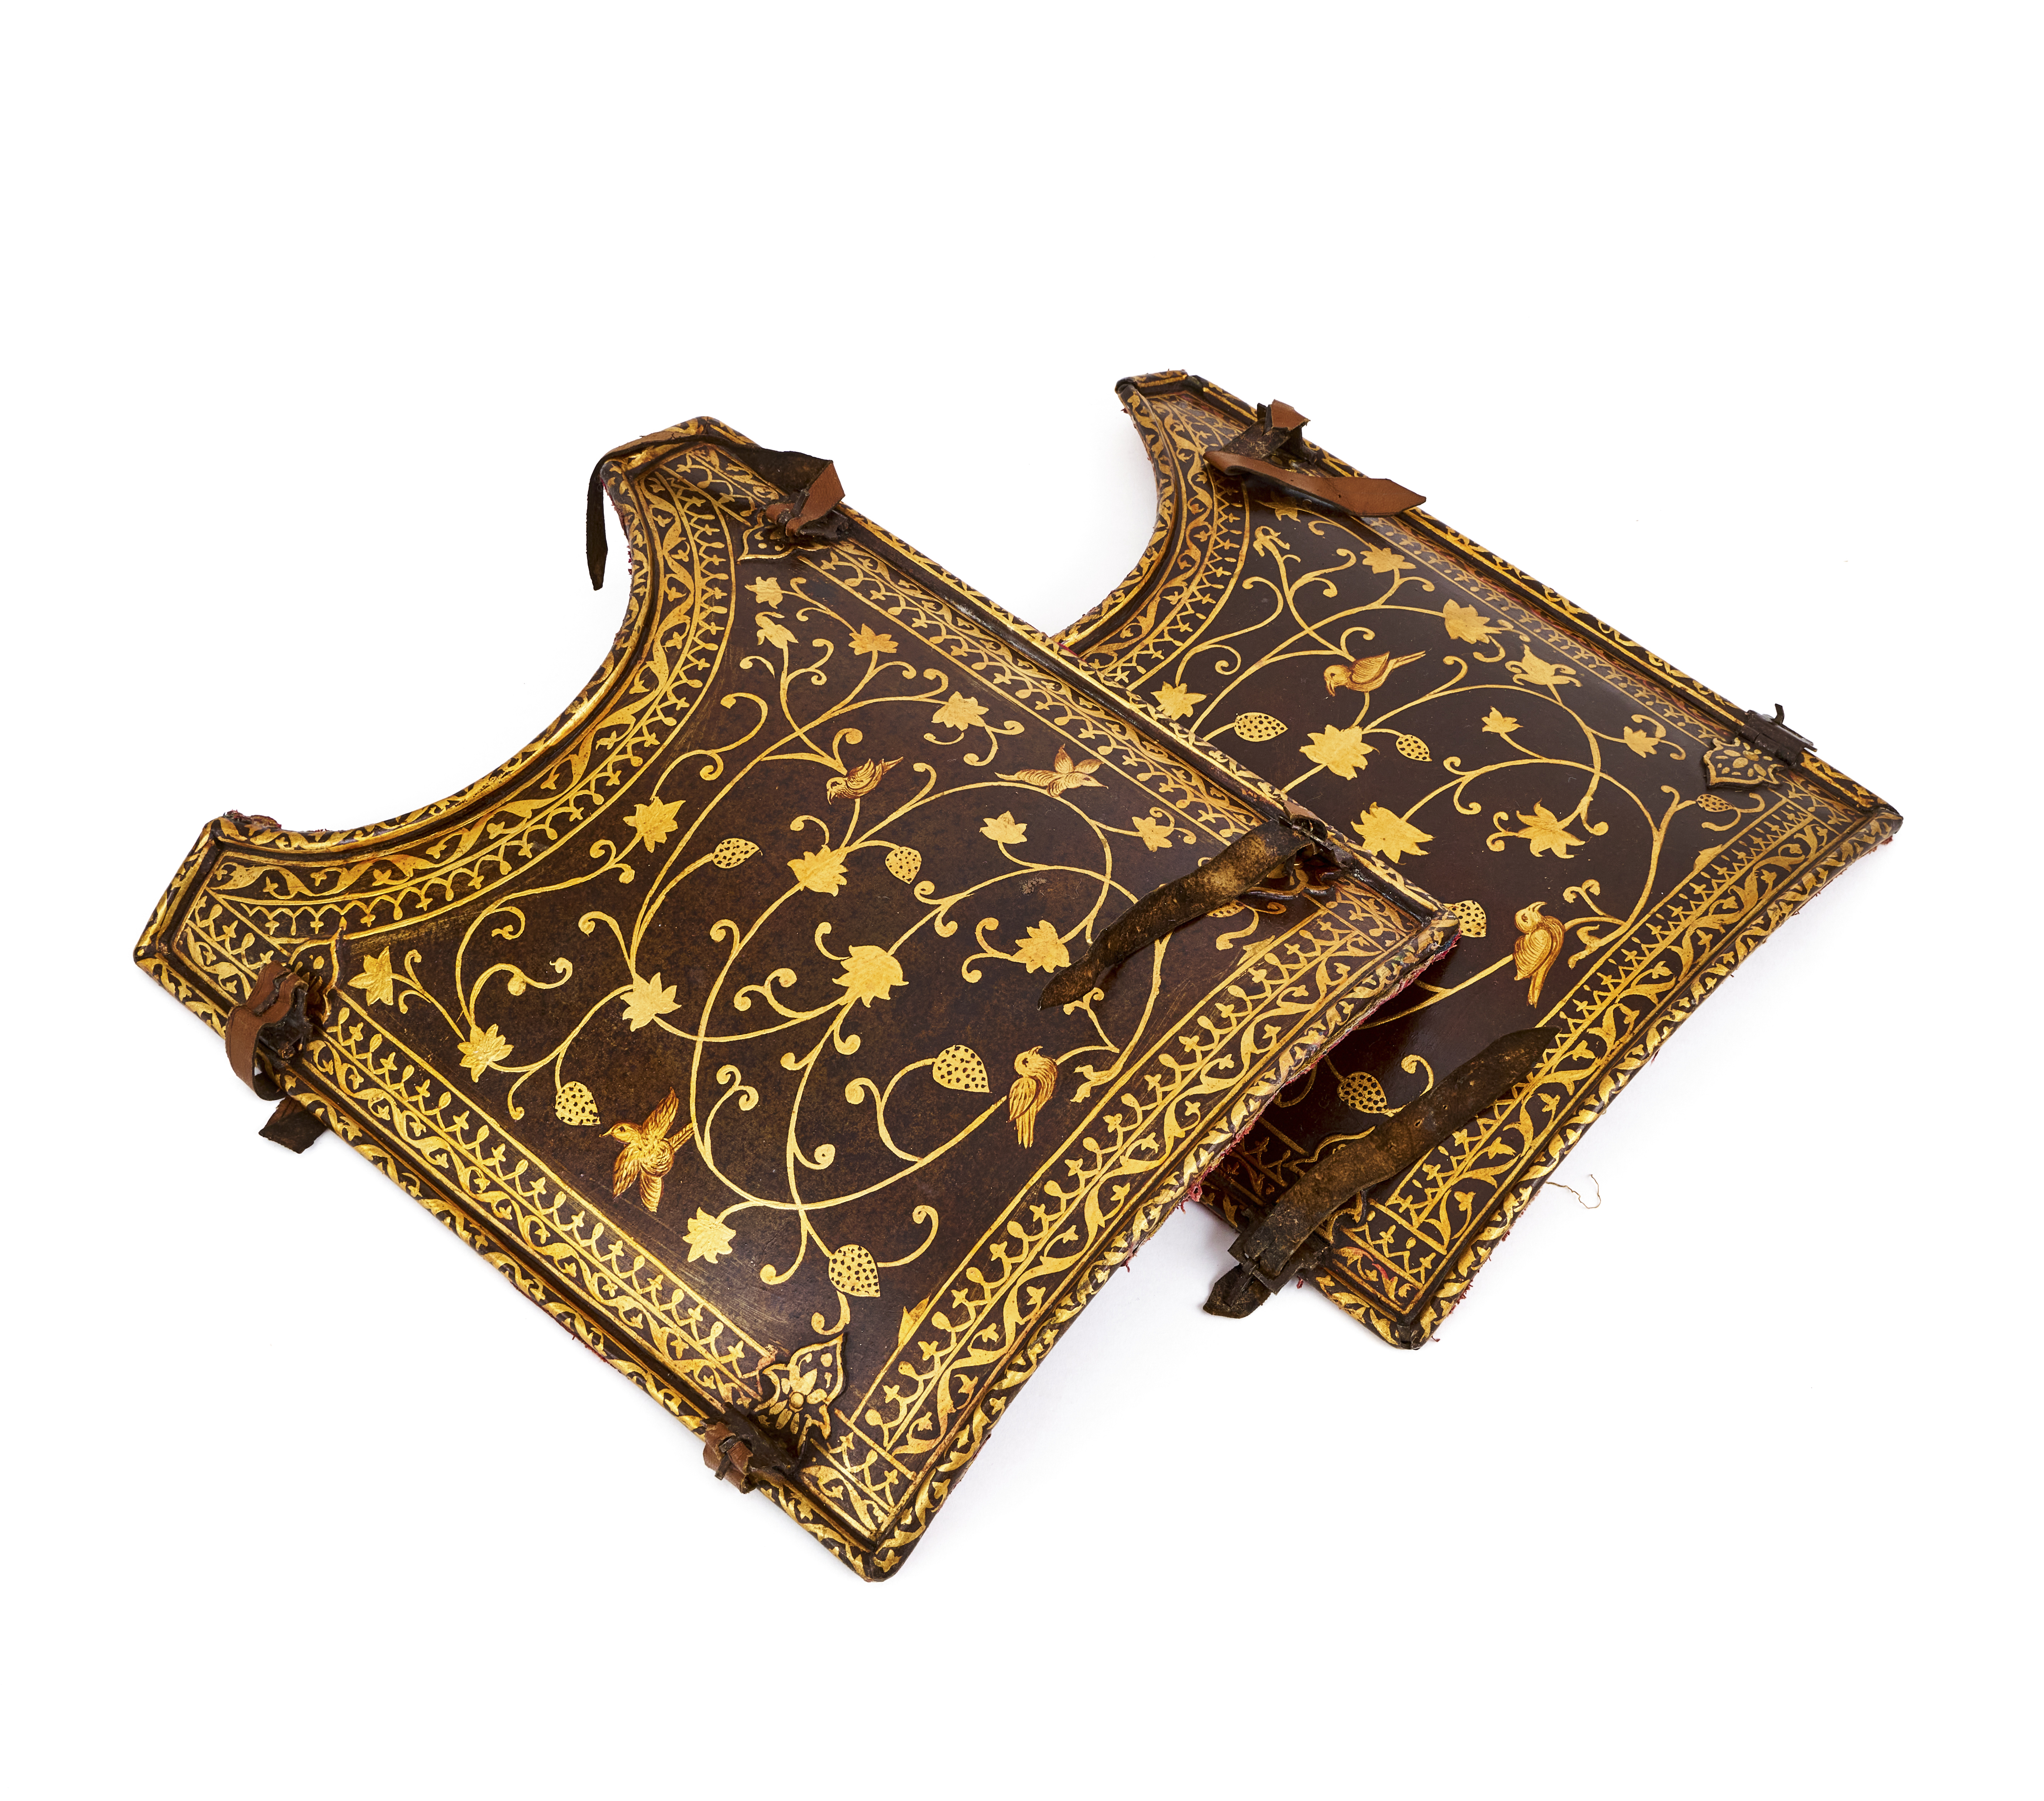 A PAIR OF GOLD-DAMASCENED STEEL SIDE ARMOUR PLATES, 19TH CENTURY, QAJAR - Image 3 of 6